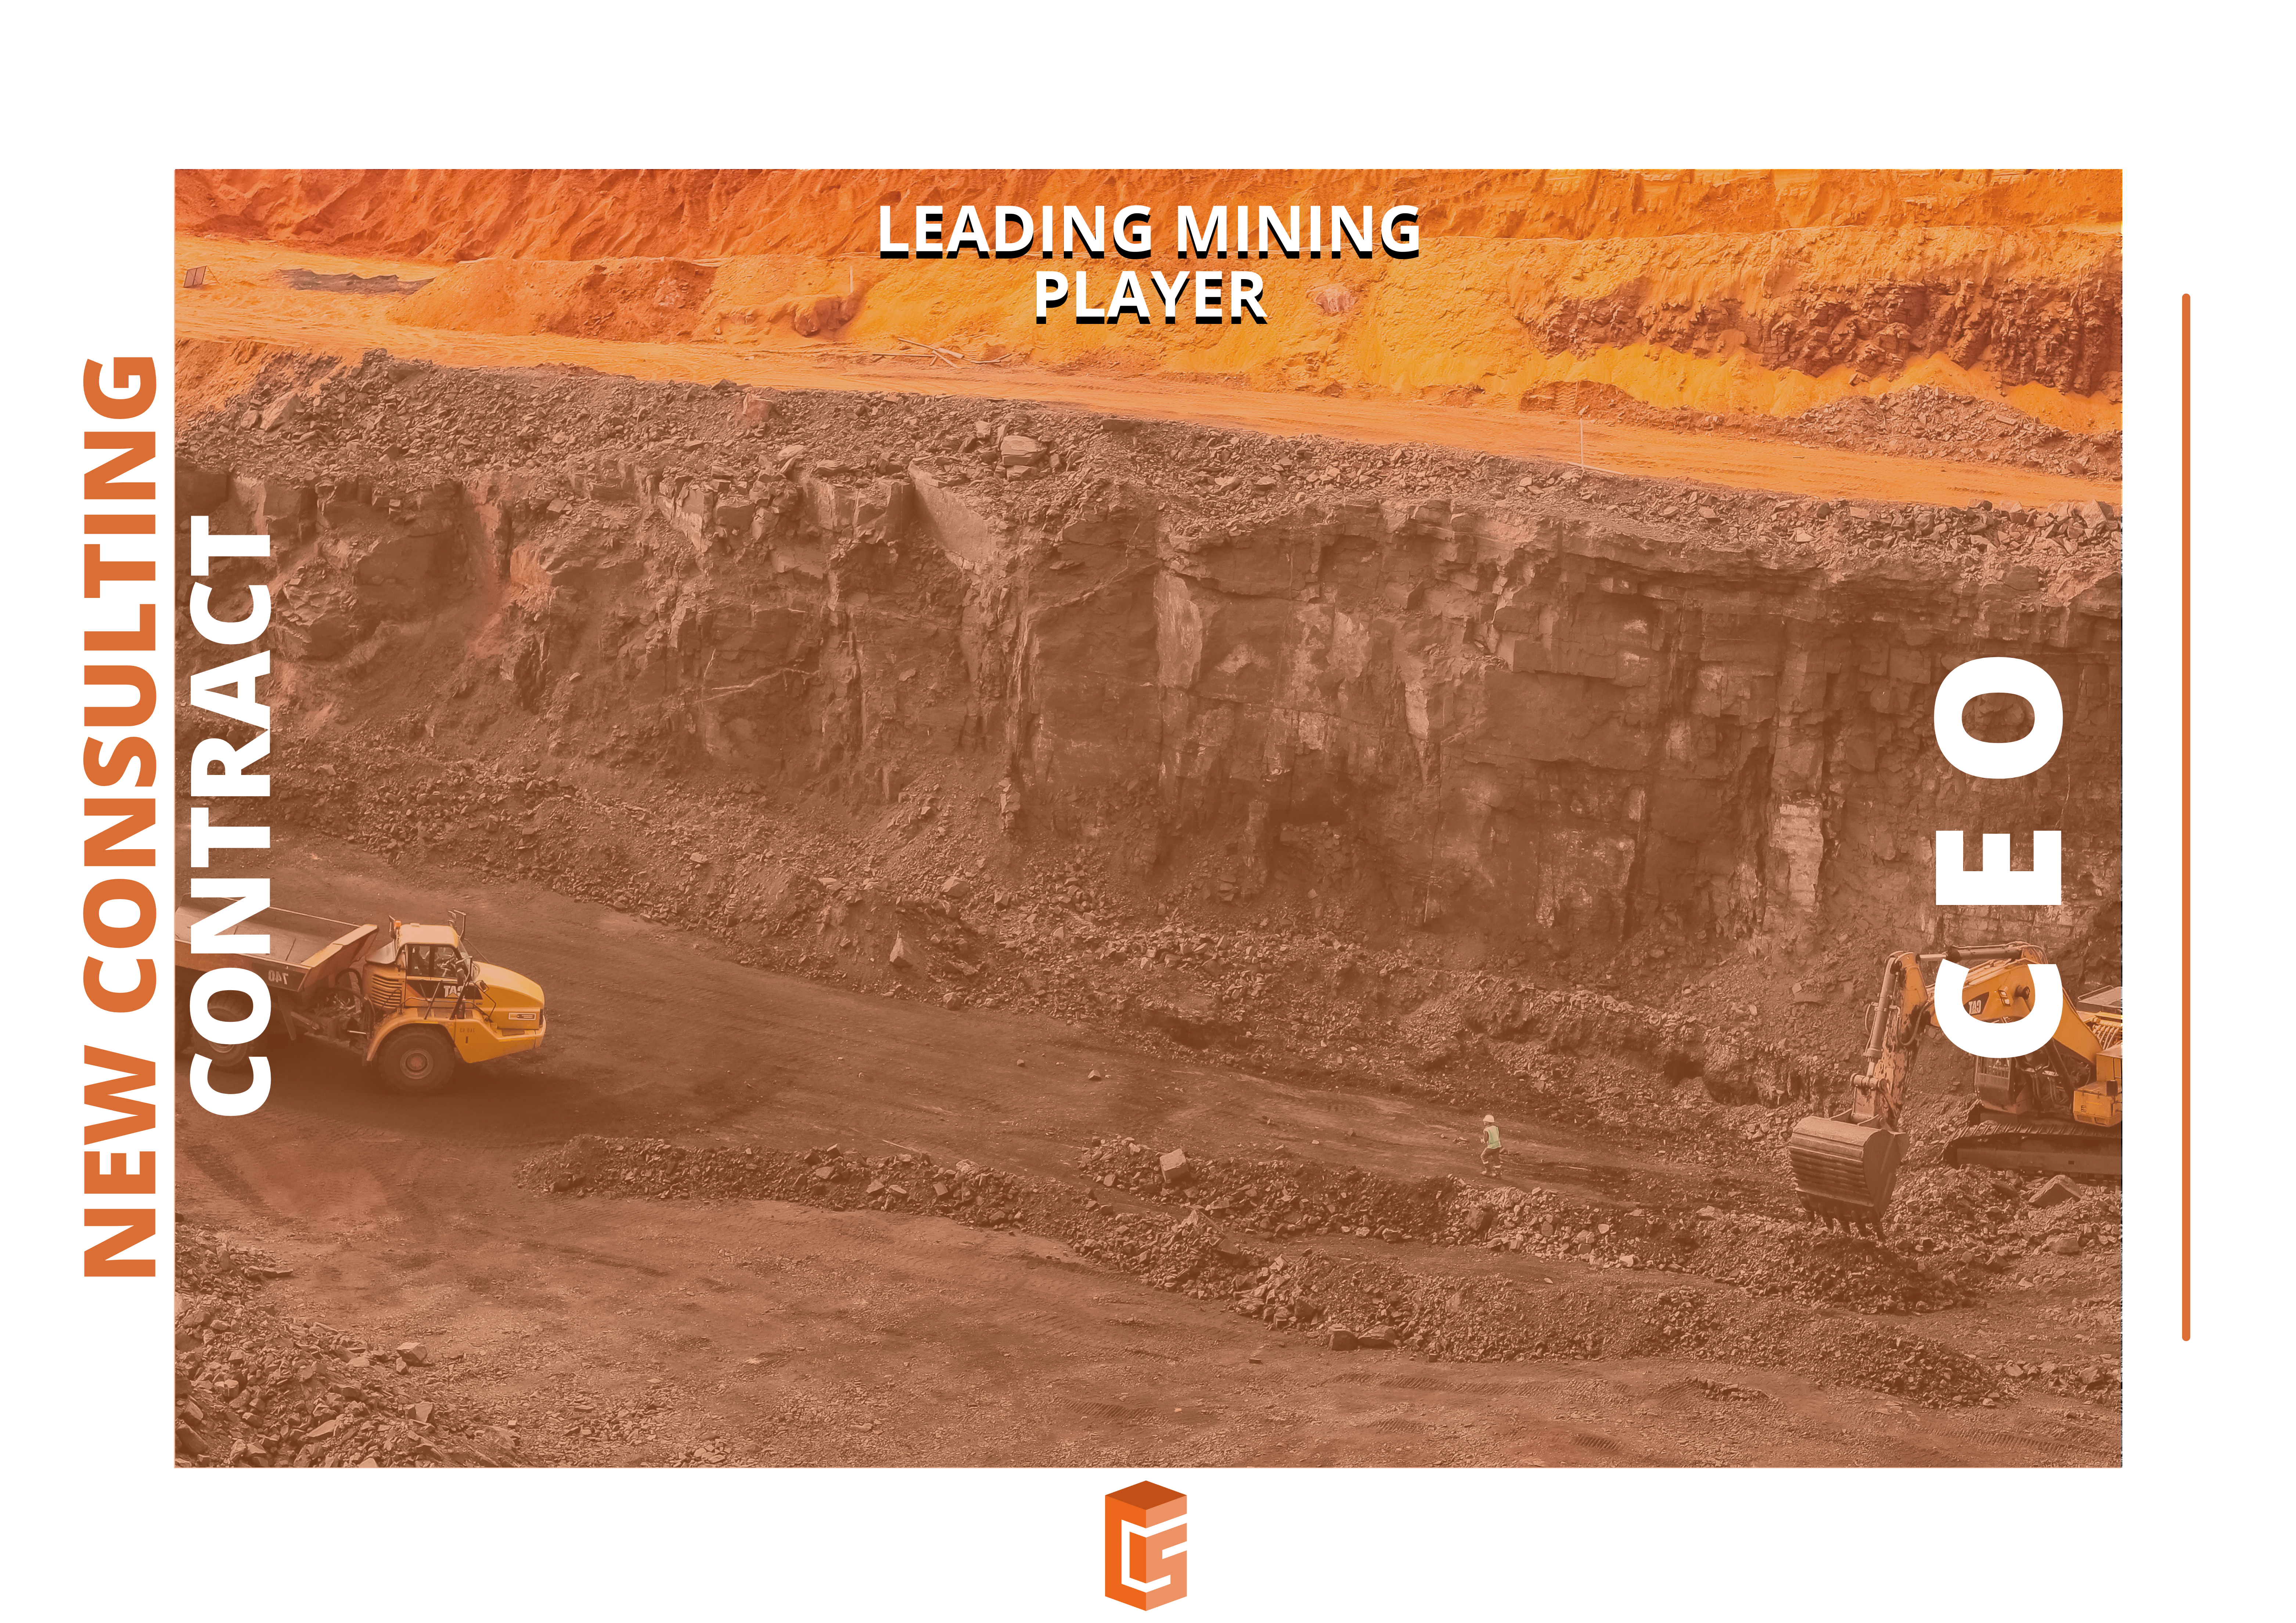 C&S Partners - Mining player- CEO Chrysalis - Consulting